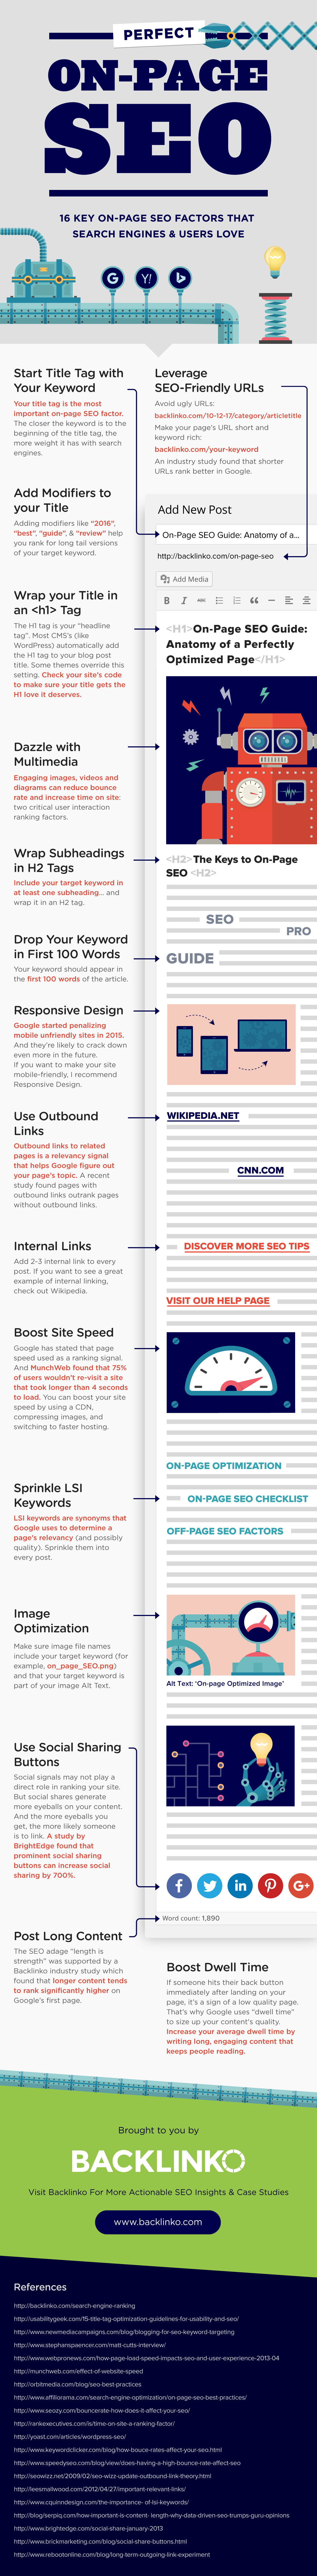 Perfect On-Page SEO: 16 Key On-Page SEO Factors That Search Engines And Users Love [INFOGRAPHIC]